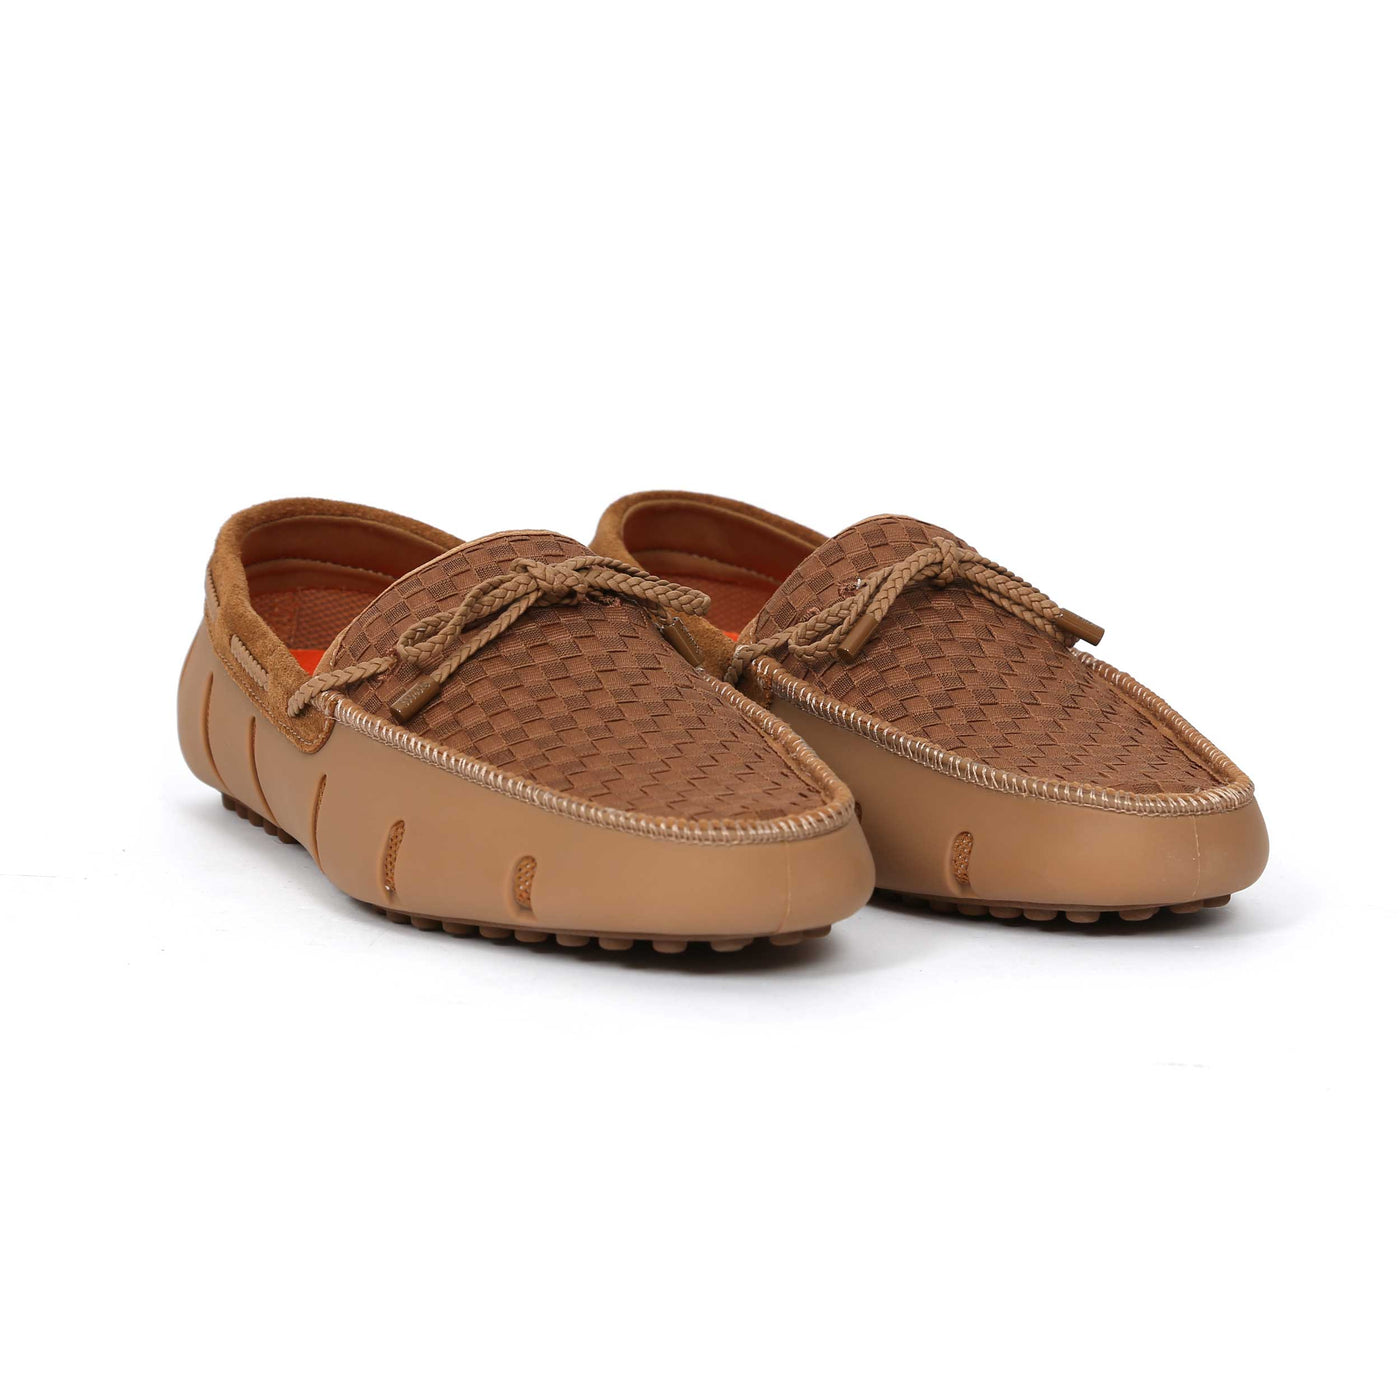 Swims Woven Driver Shoe in Nut Pair